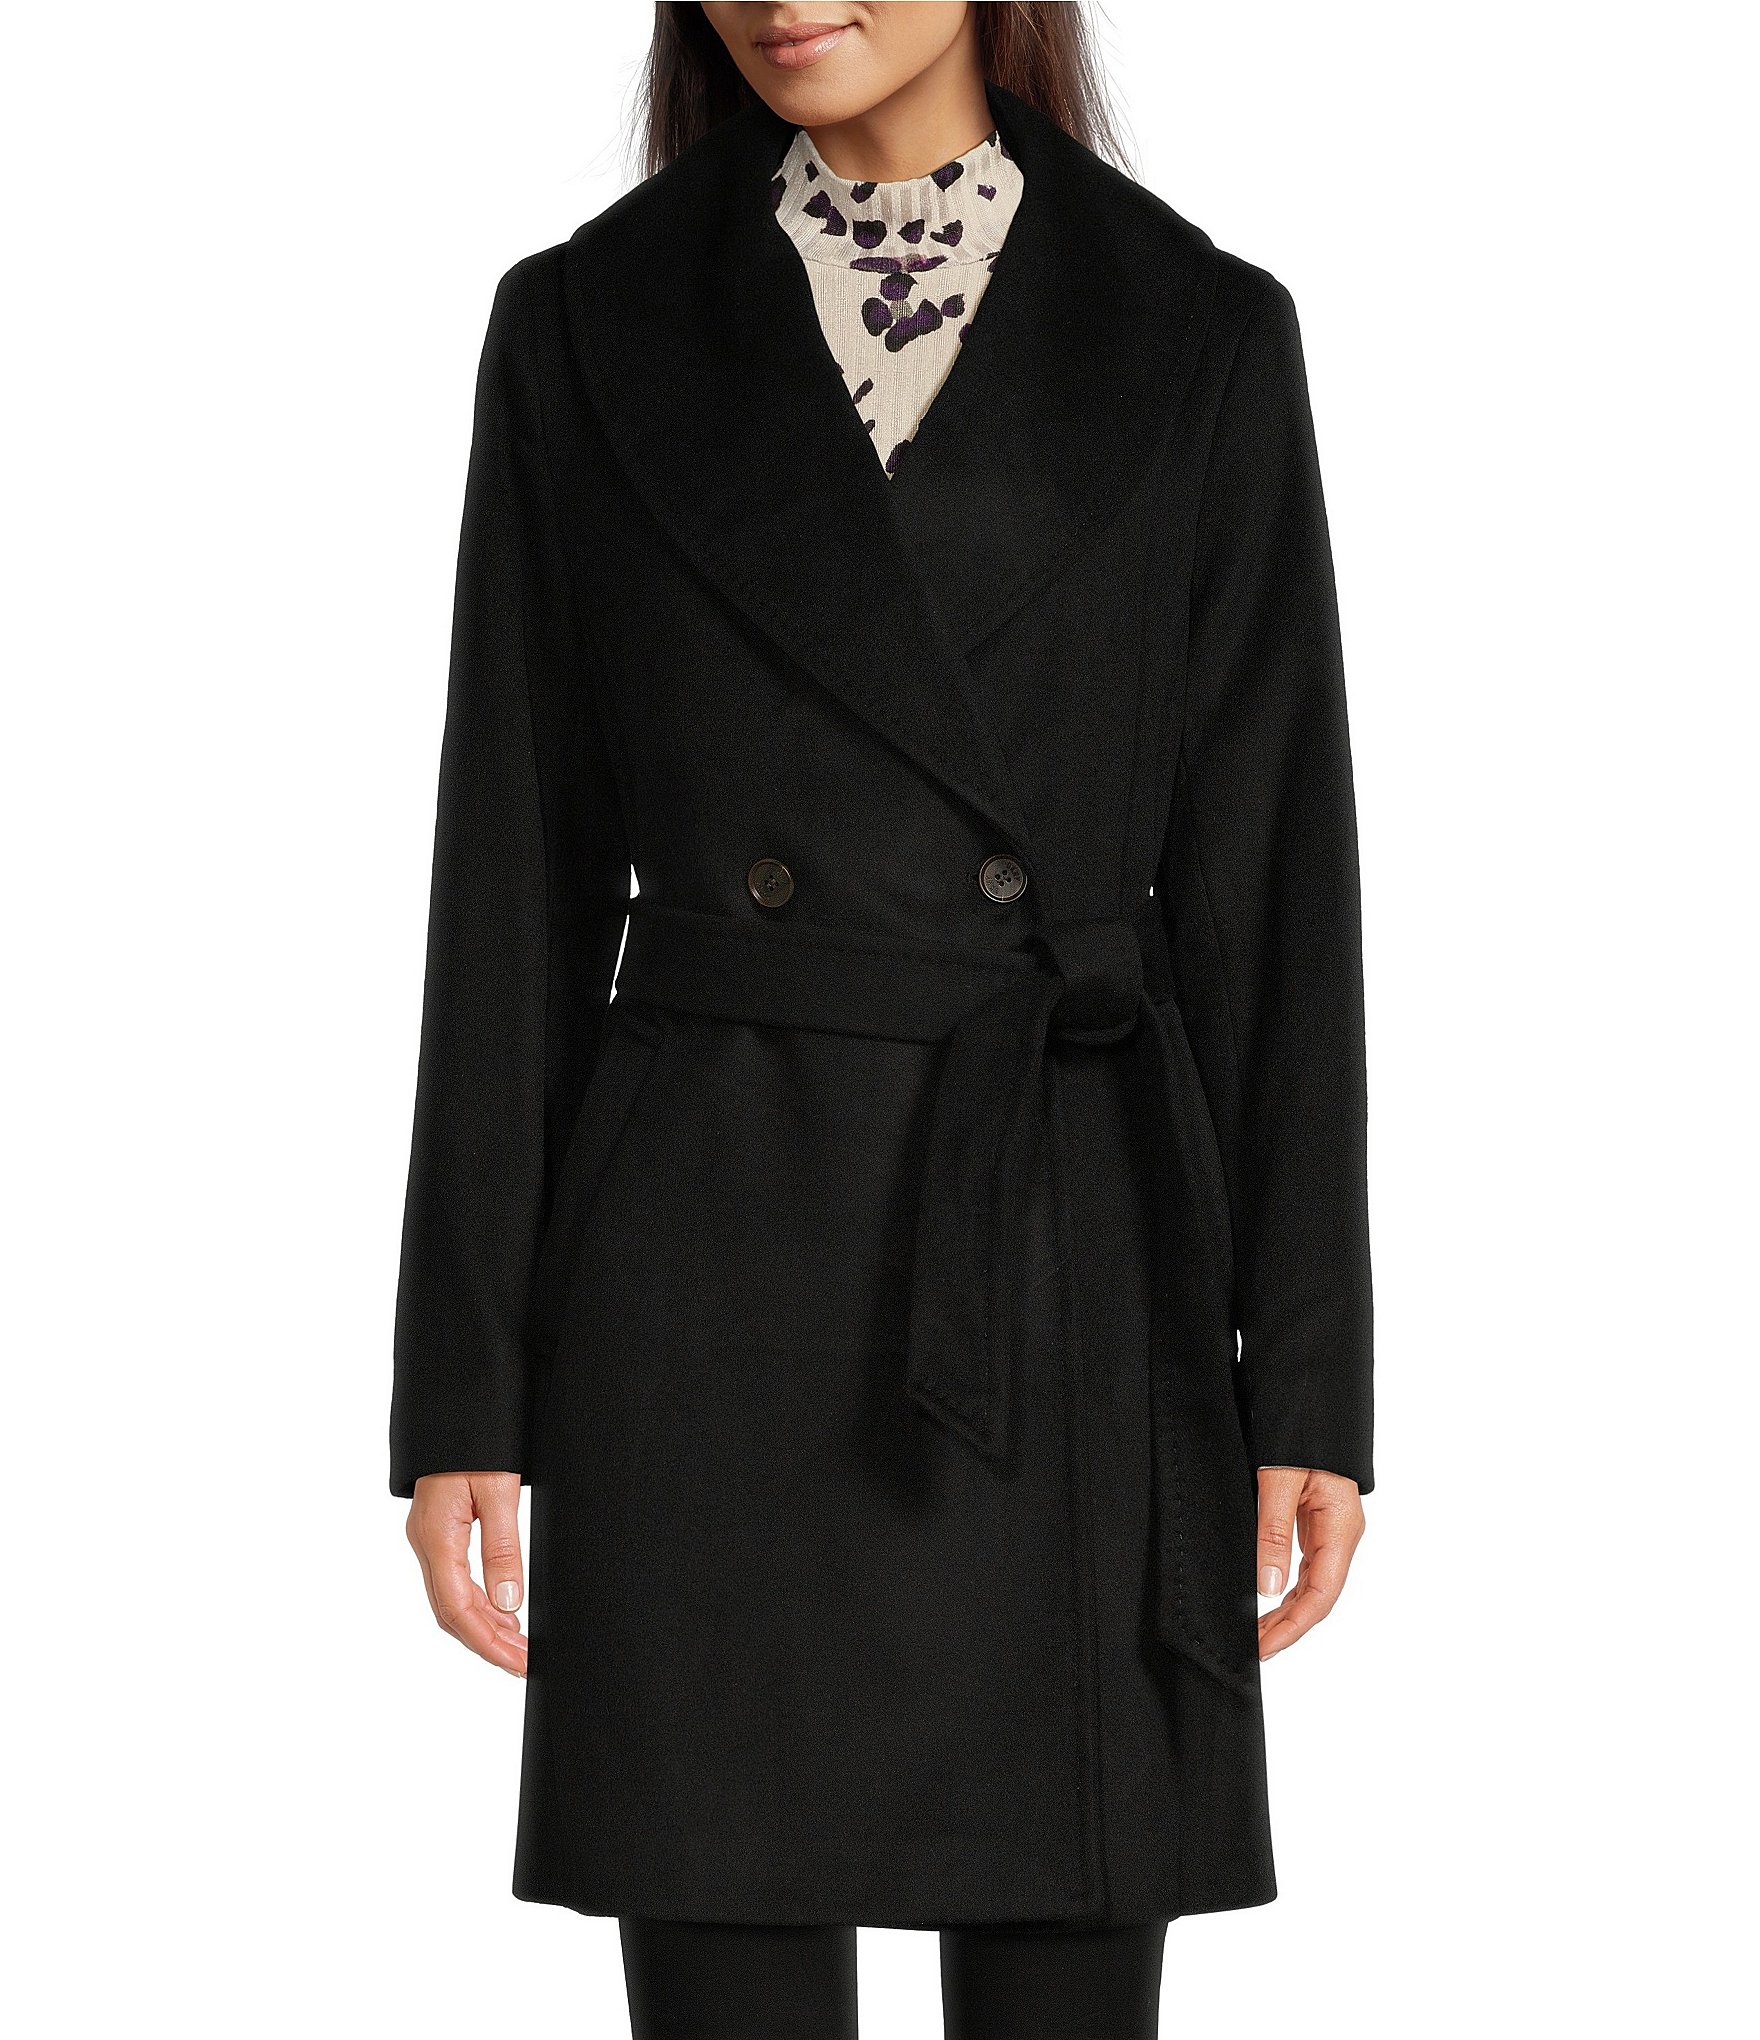 DKNY Petite Size Shawl Collar Belted Wrap Front Coat | Dillard's